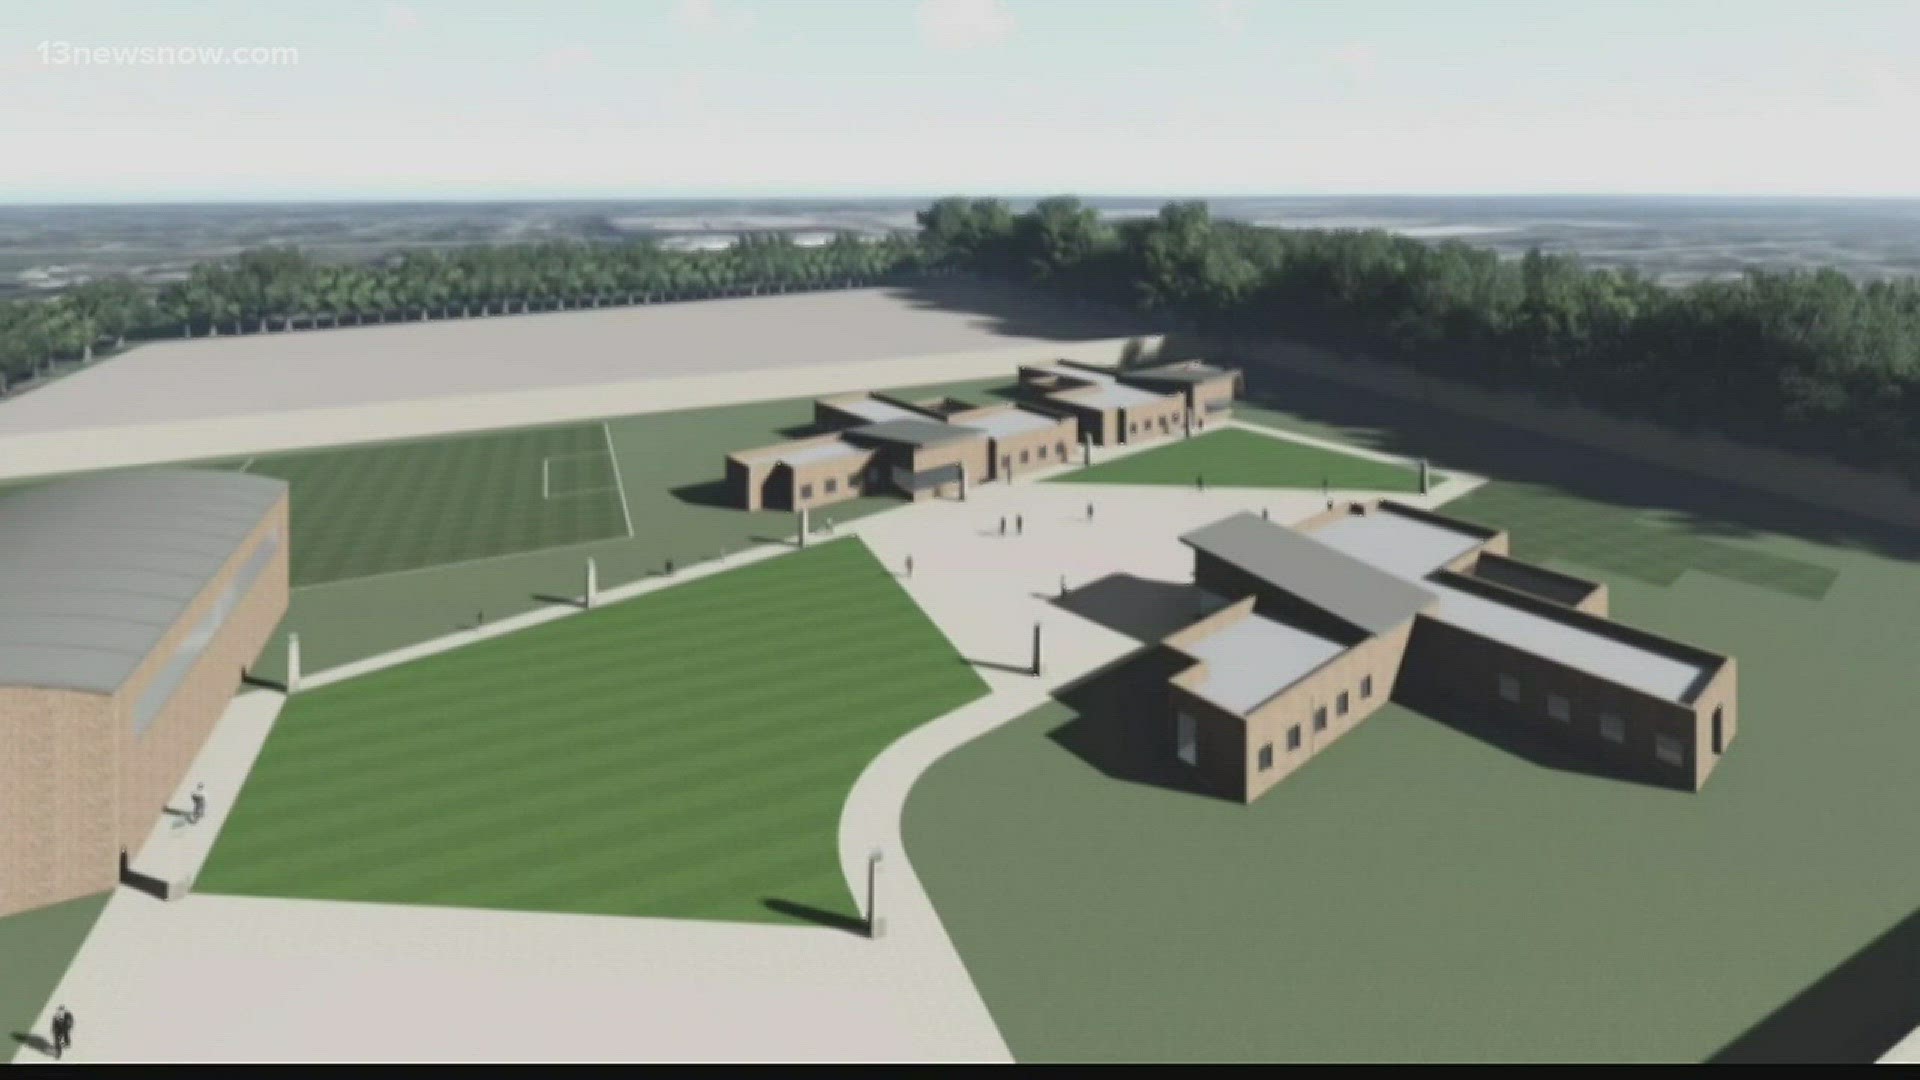 Neighbors in Chesapeake are fired up about a proposed juvenile correctional center